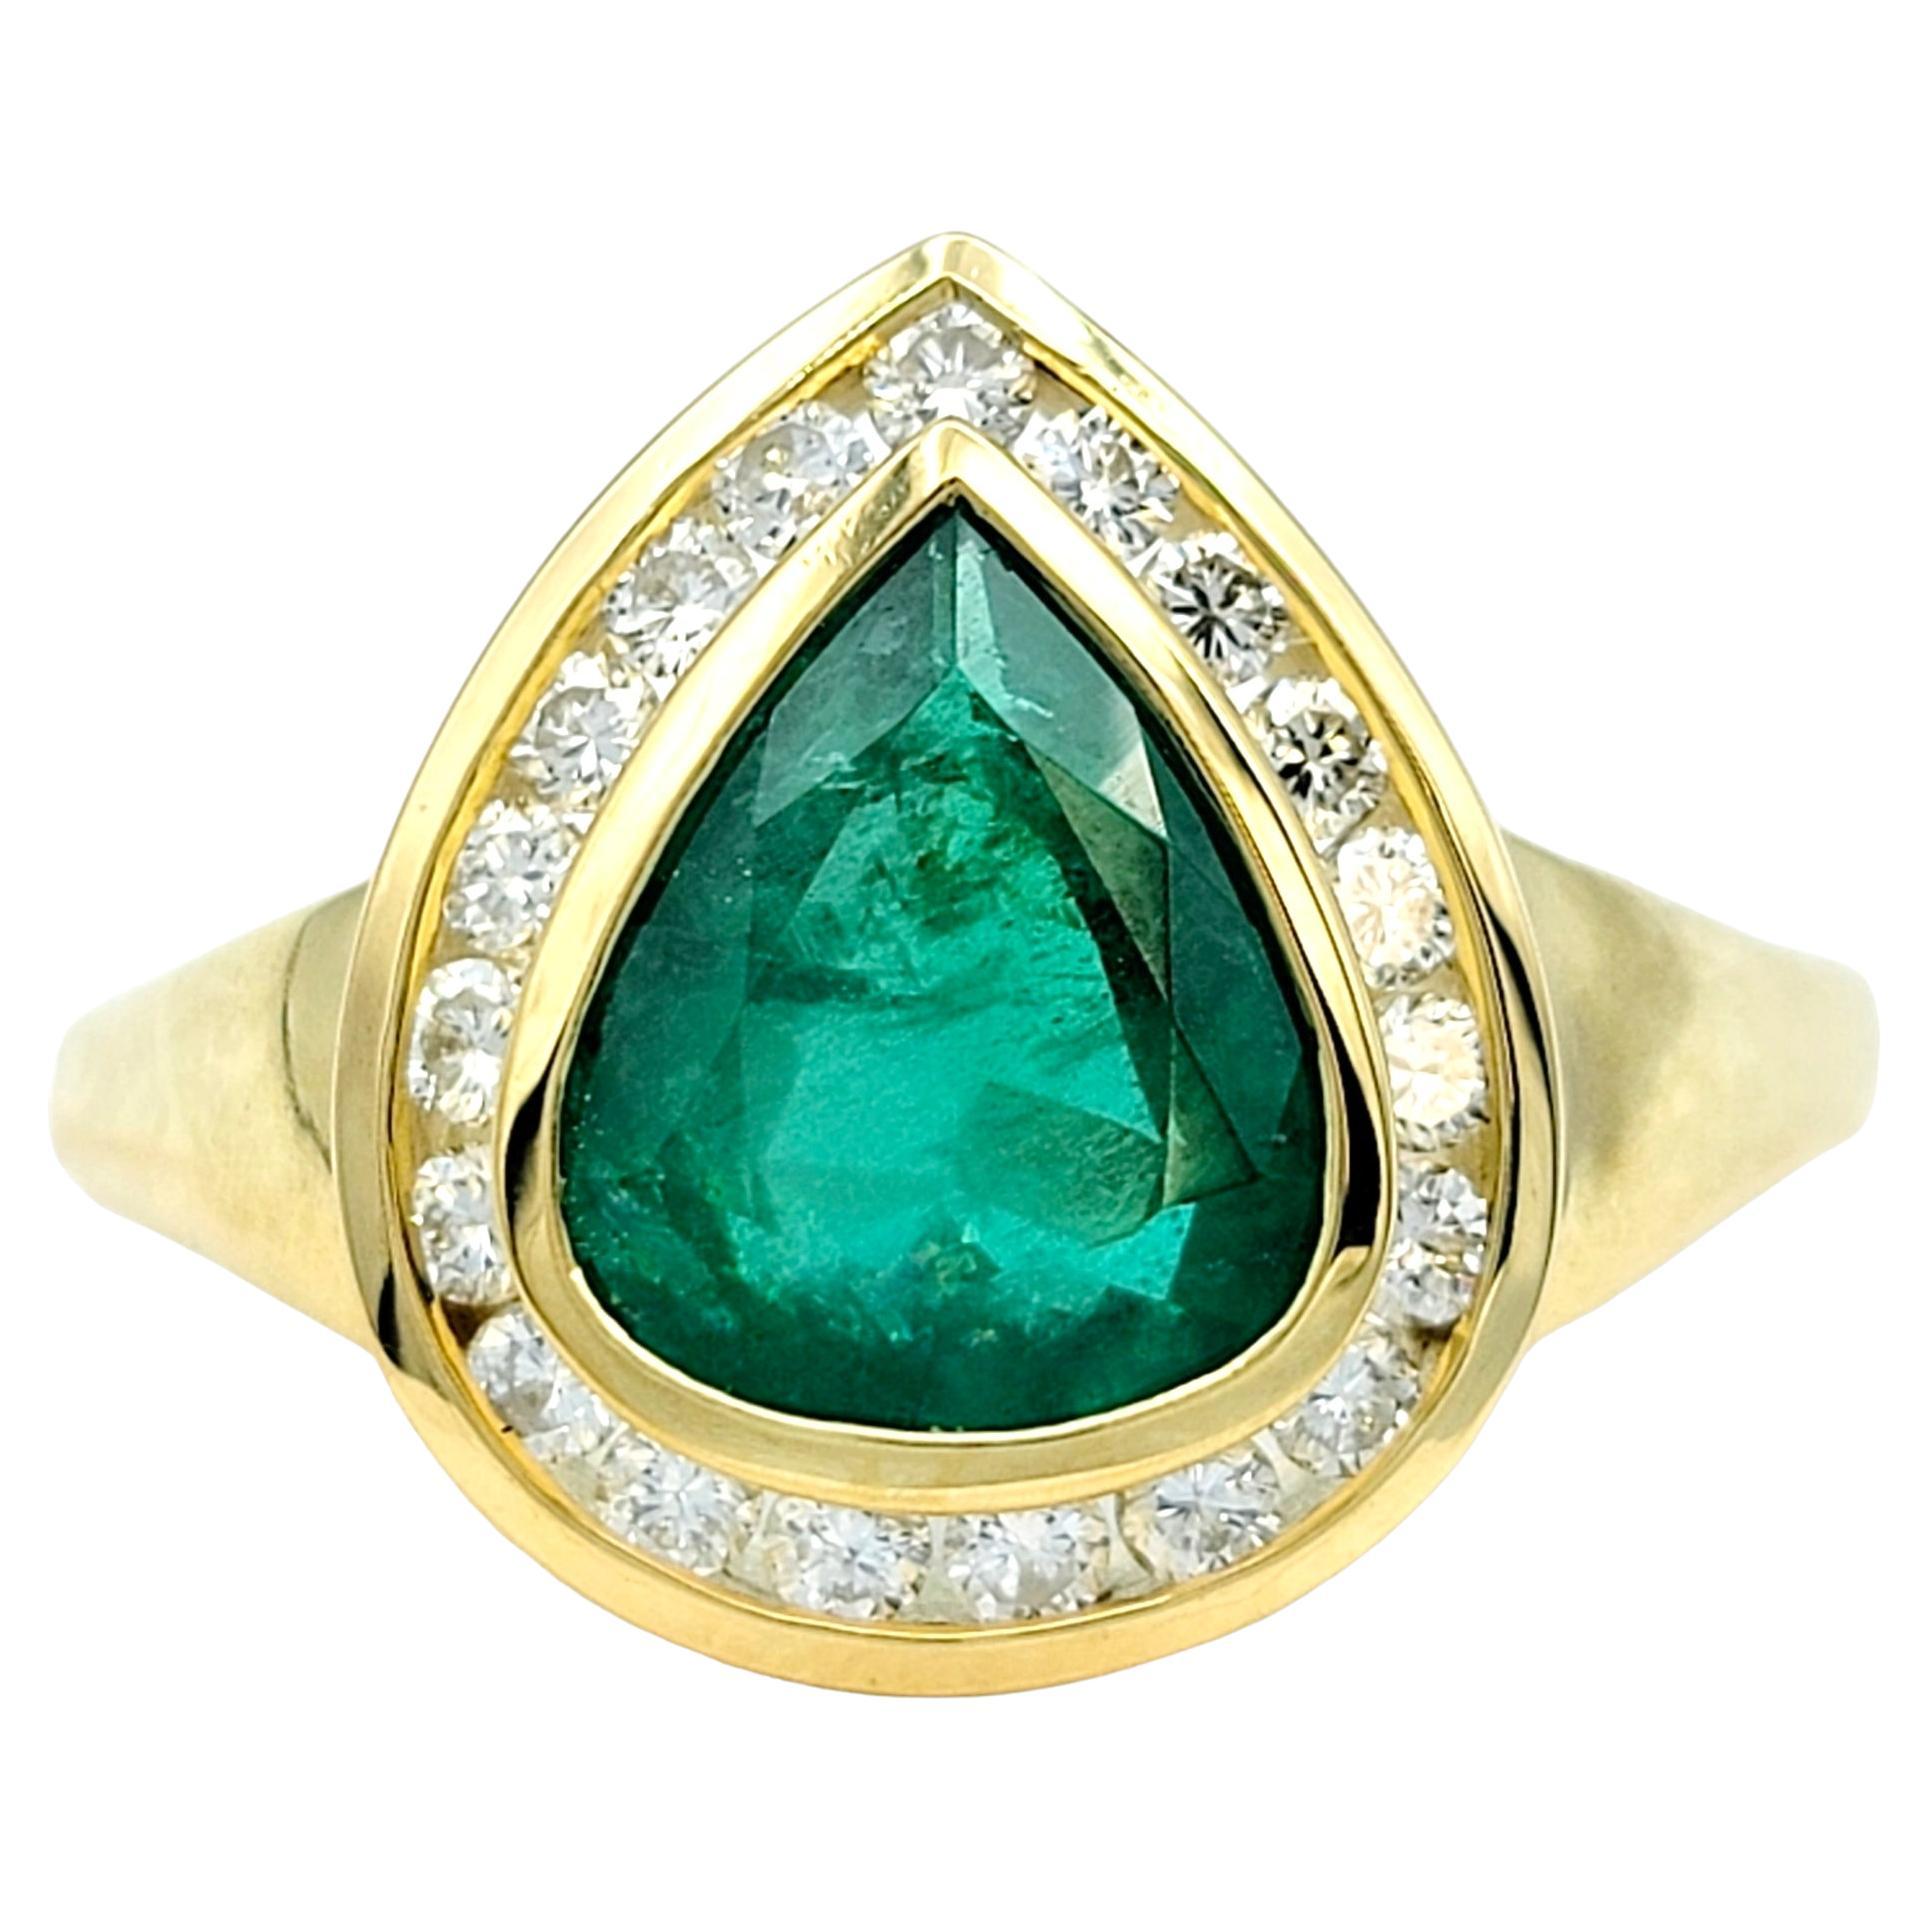 Ring size: 9.25 

This elegant emerald ring, beautifully set in 18 karat yellow gold, is a striking piece with timeless beauty and bold color. The centerpiece, a lustrous pear-shaped emerald, rests securely within a bezel setting. Surrounding the